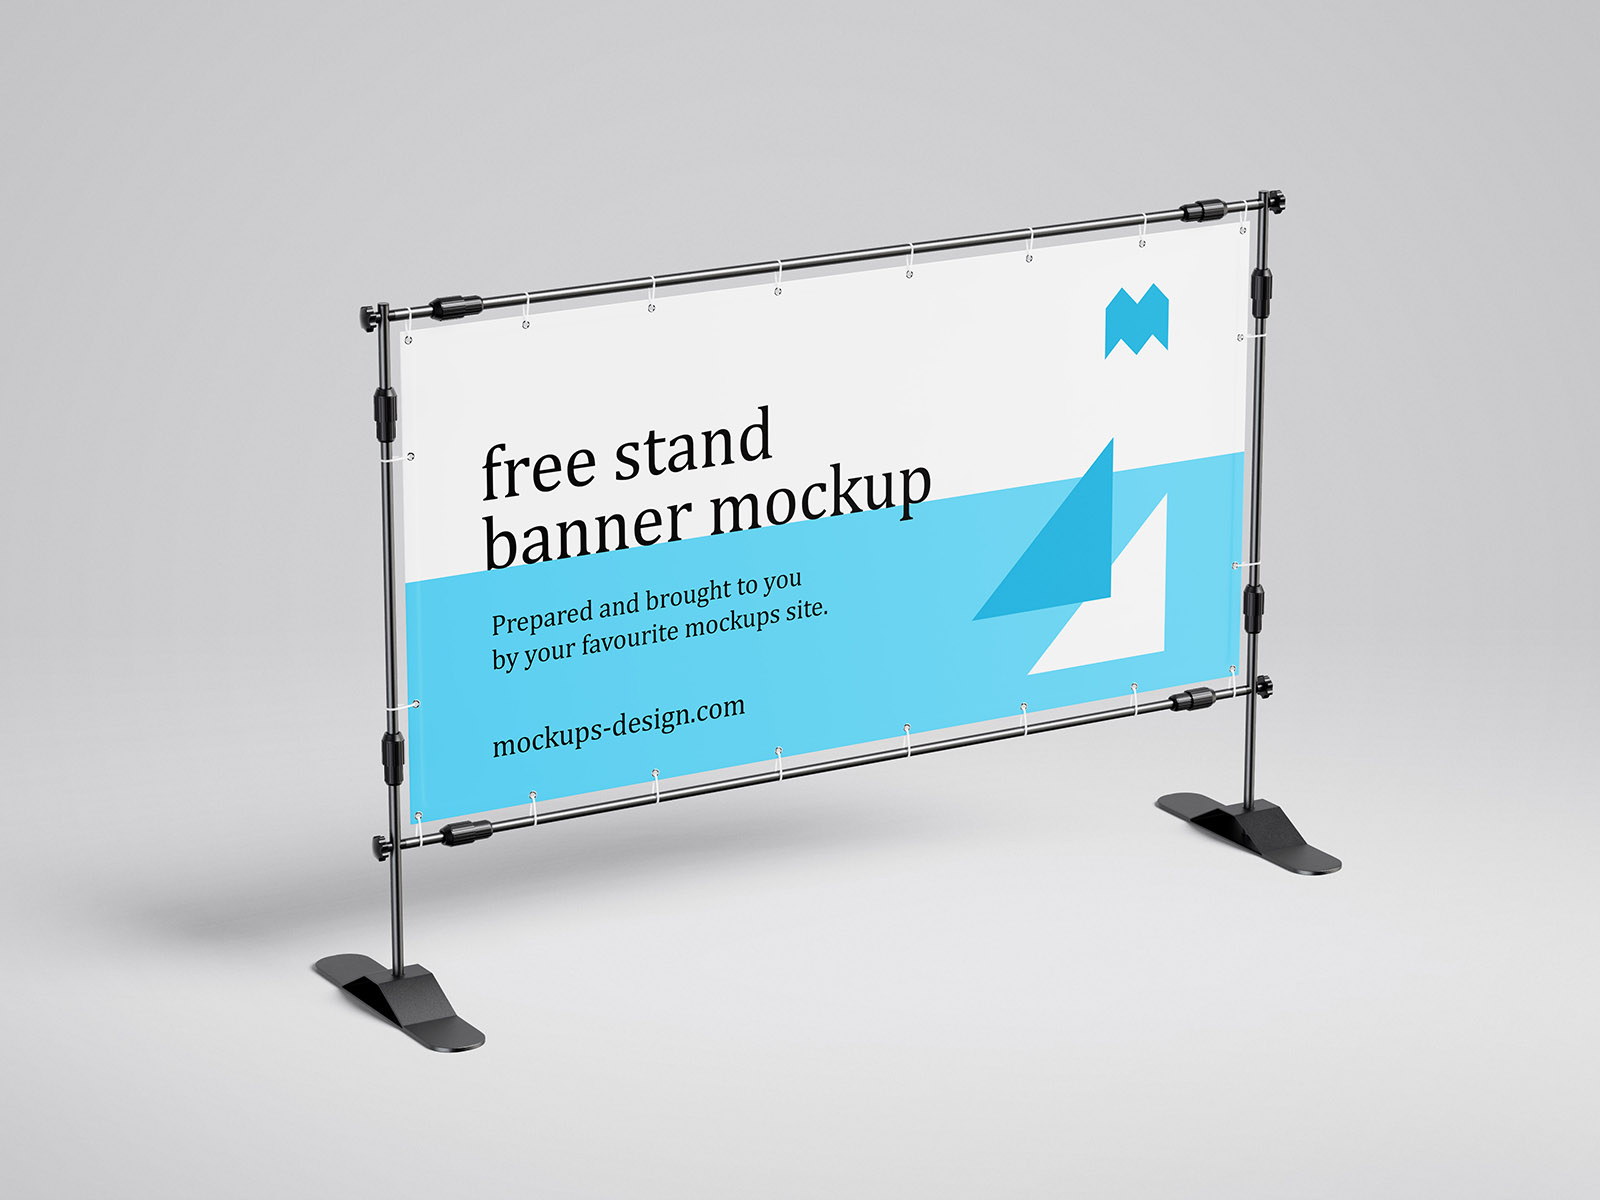 Free banner stand mockup / 200x100 cm